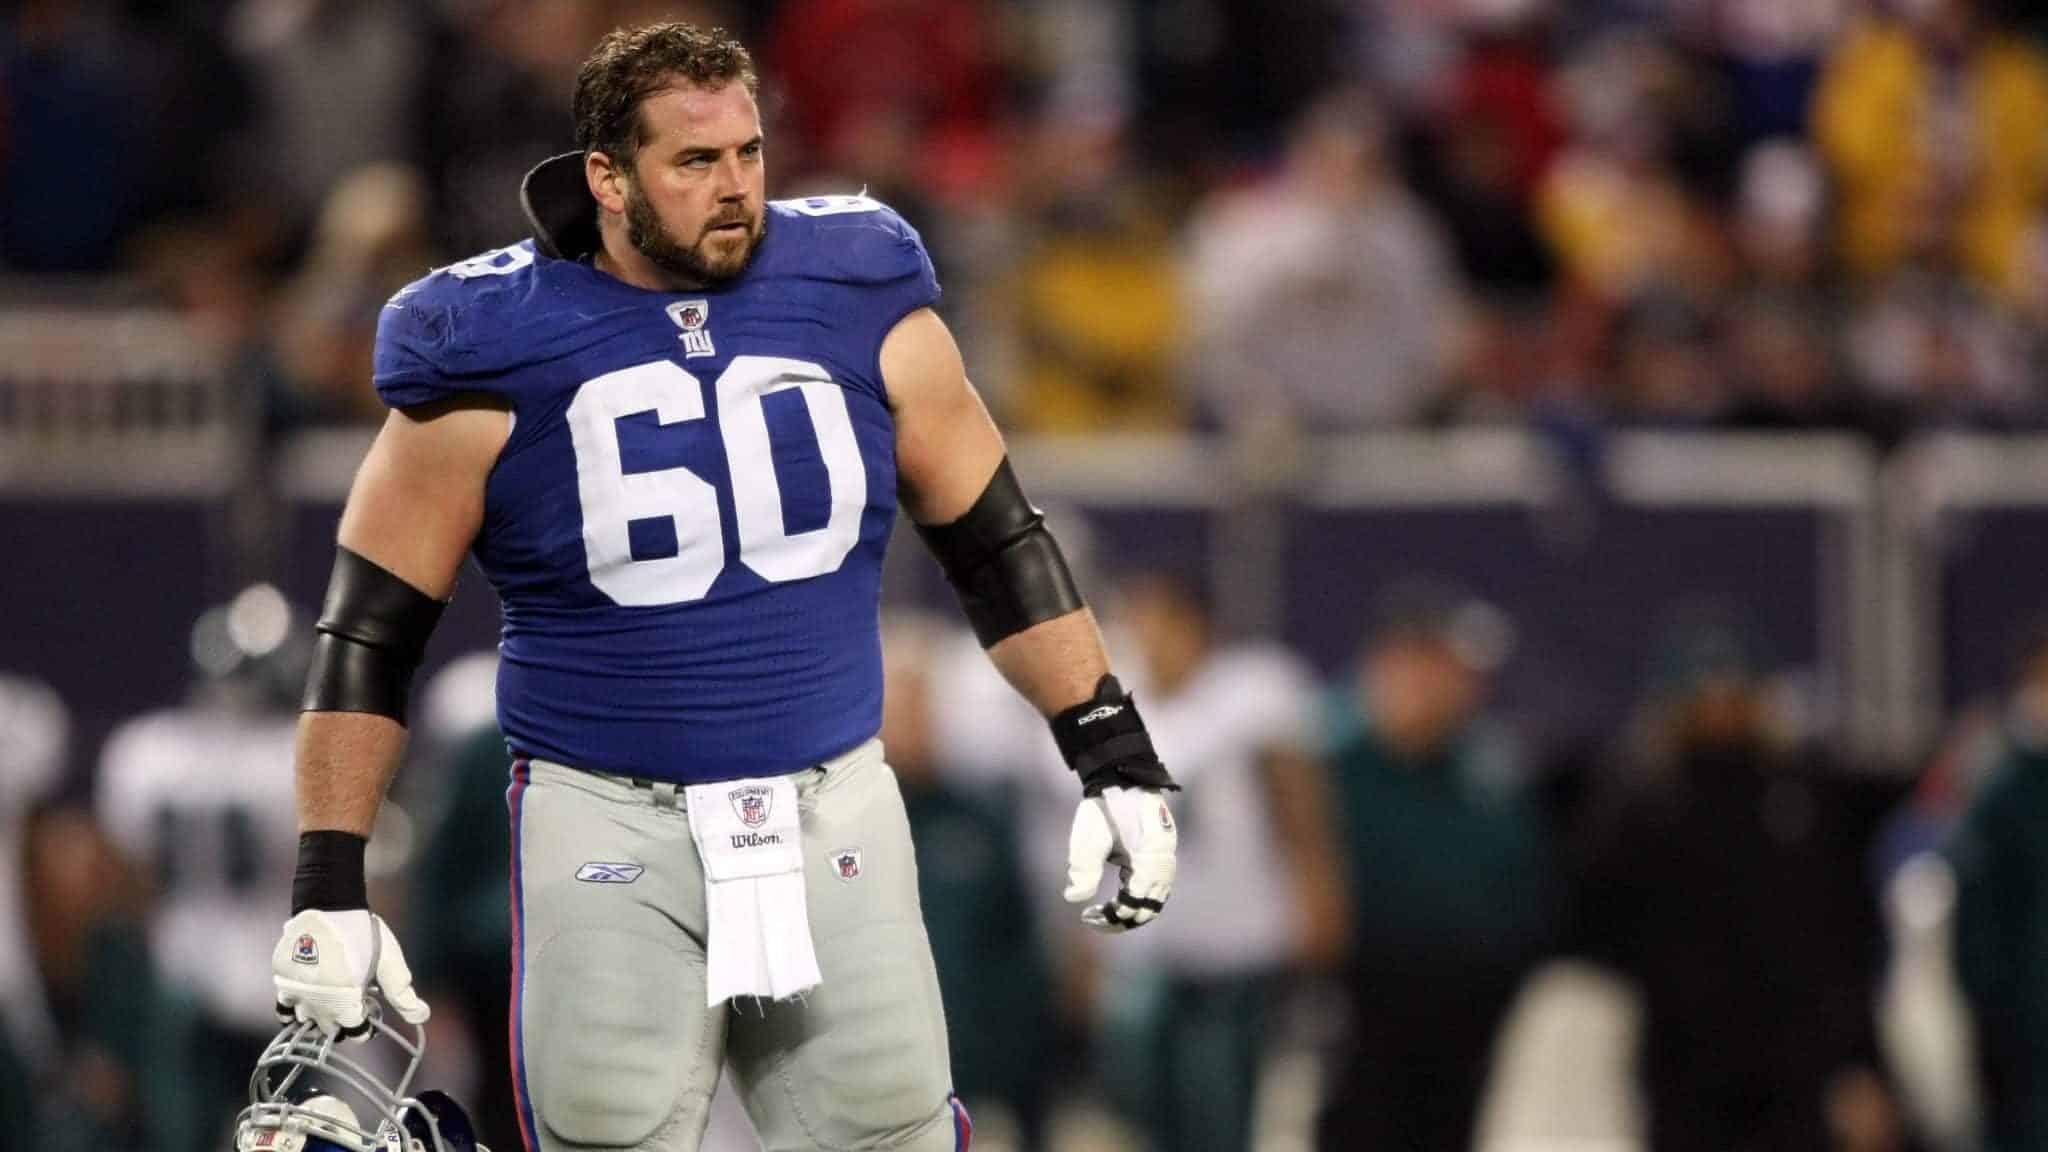 EAST RUTHERFORD, NJ - DECEMBER 13: Shaun O'Hara #60 of the New York Giants looks on against the Philadelphia Eagles at Giants Stadium on December 13, 2009 in East Rutherford, New Jersey.